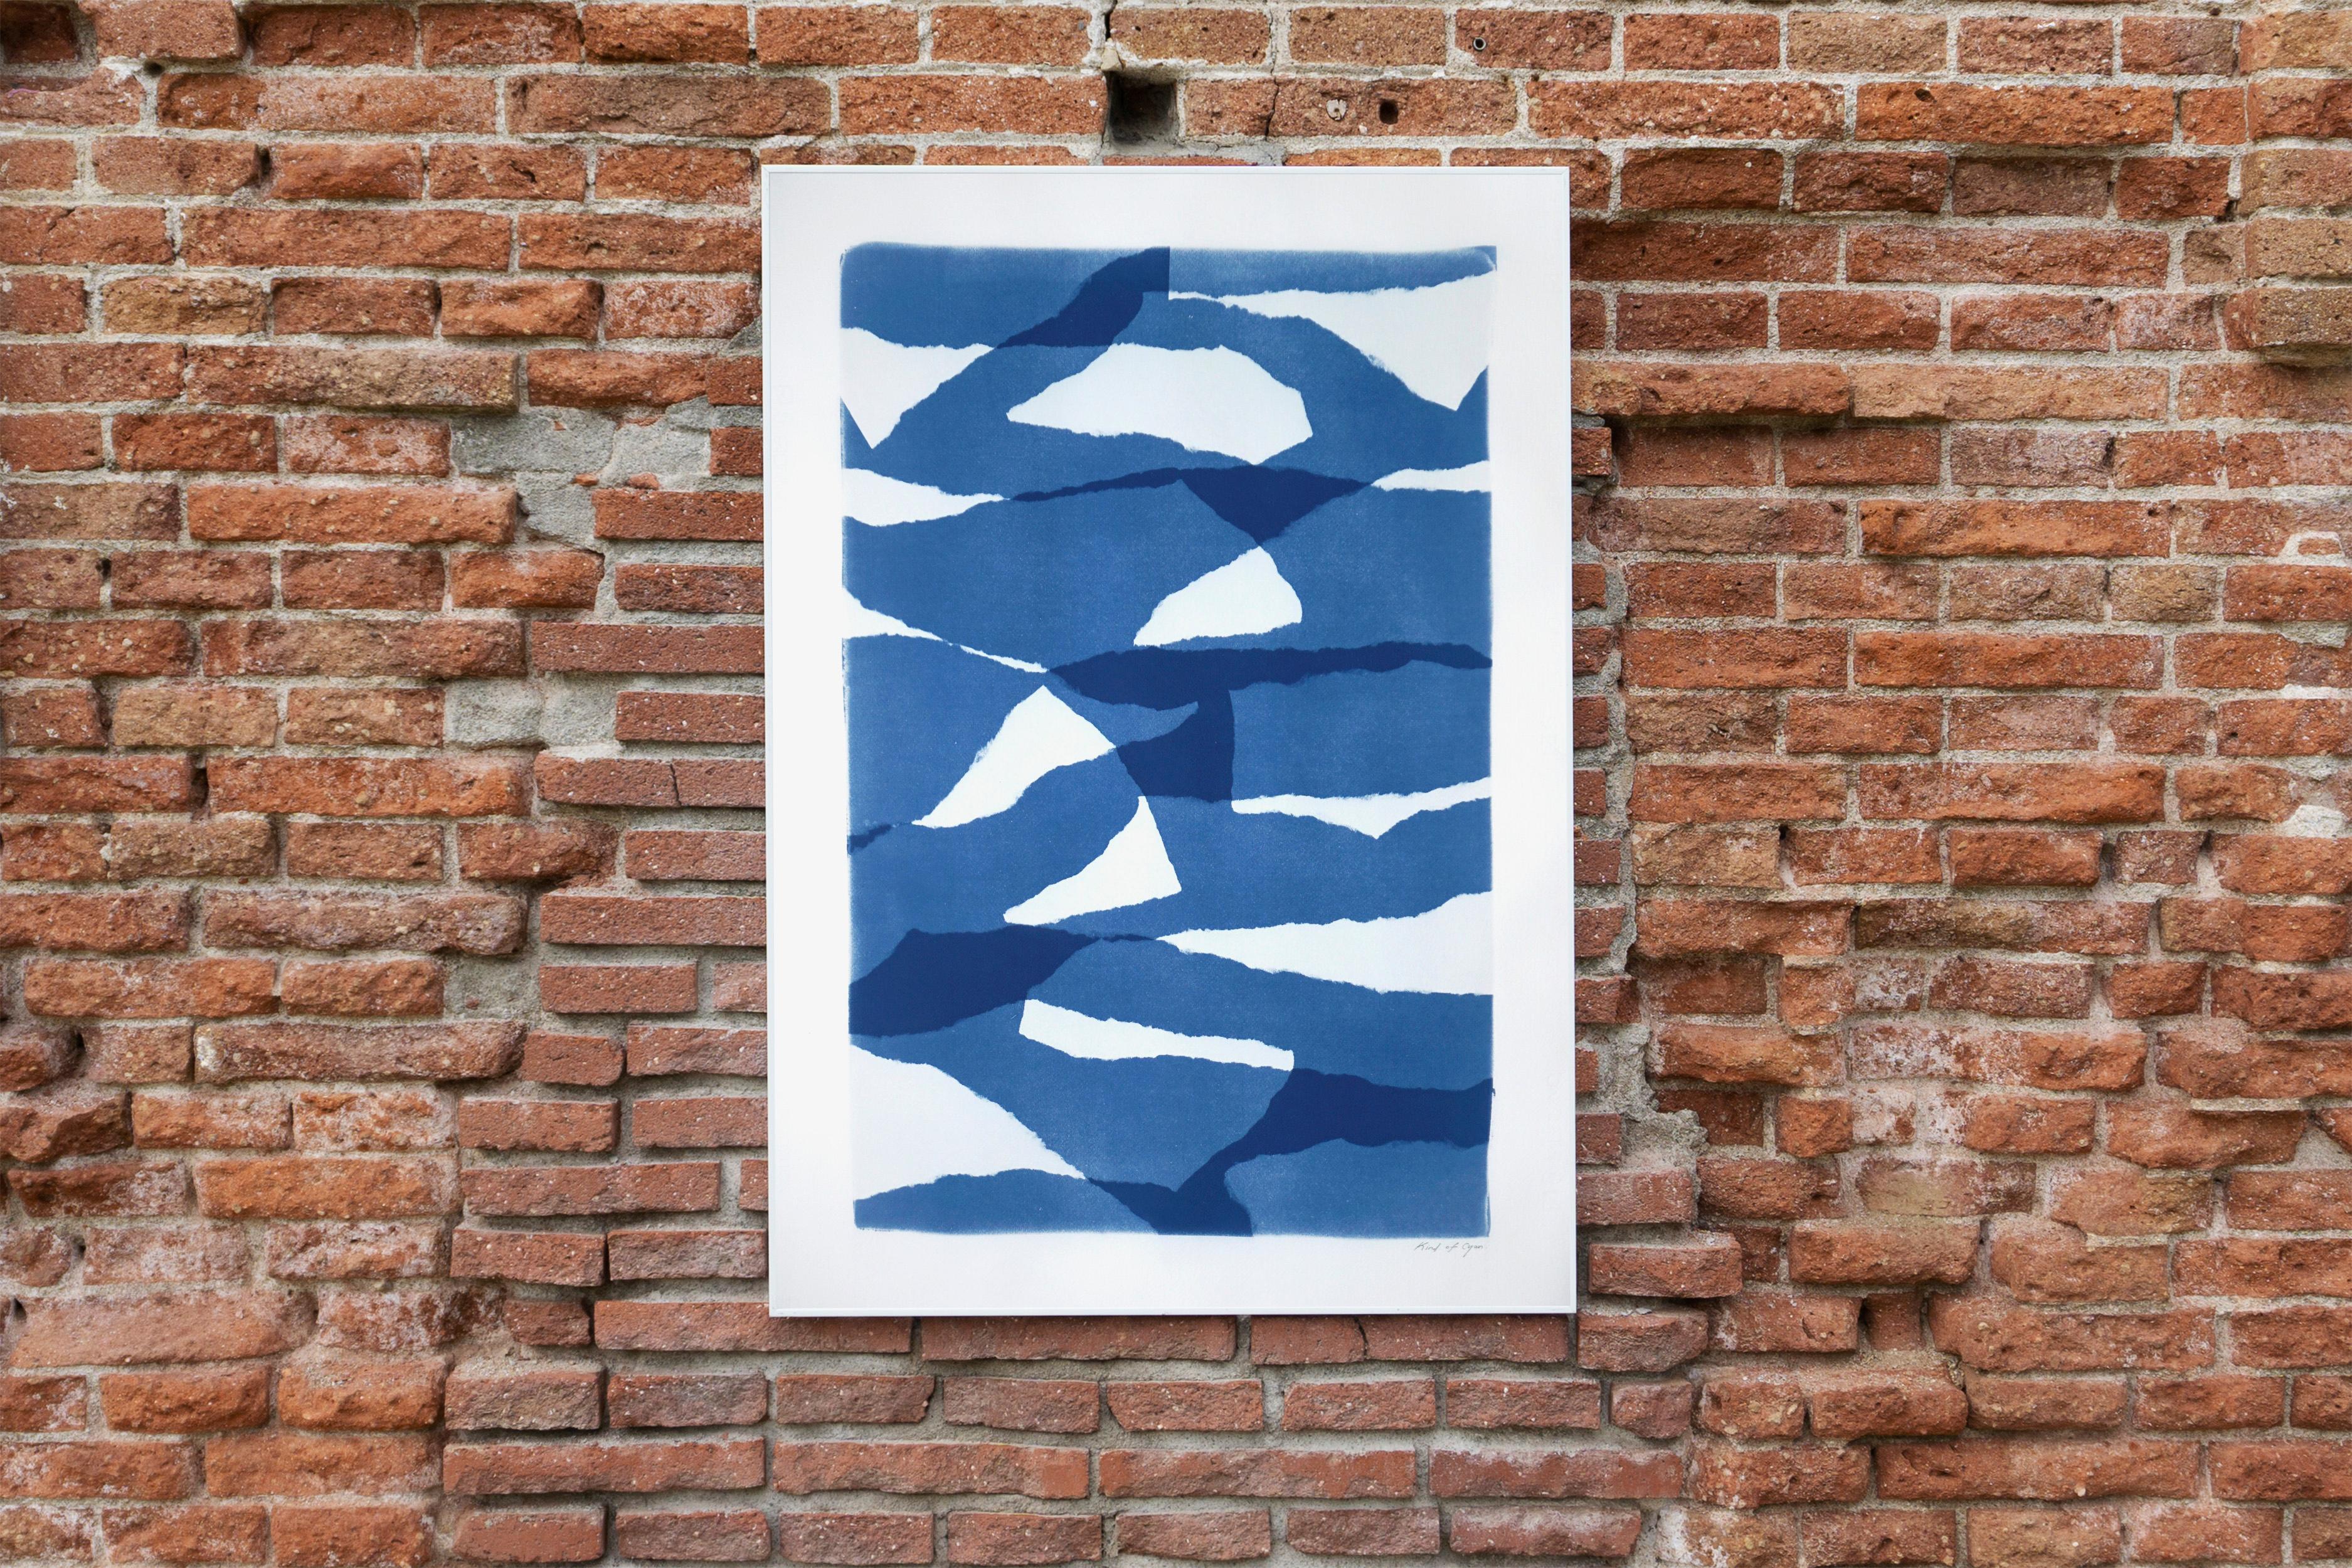 Layered Torn Paper, White and Blue Unique Print, Abstract Construction Shapes 3